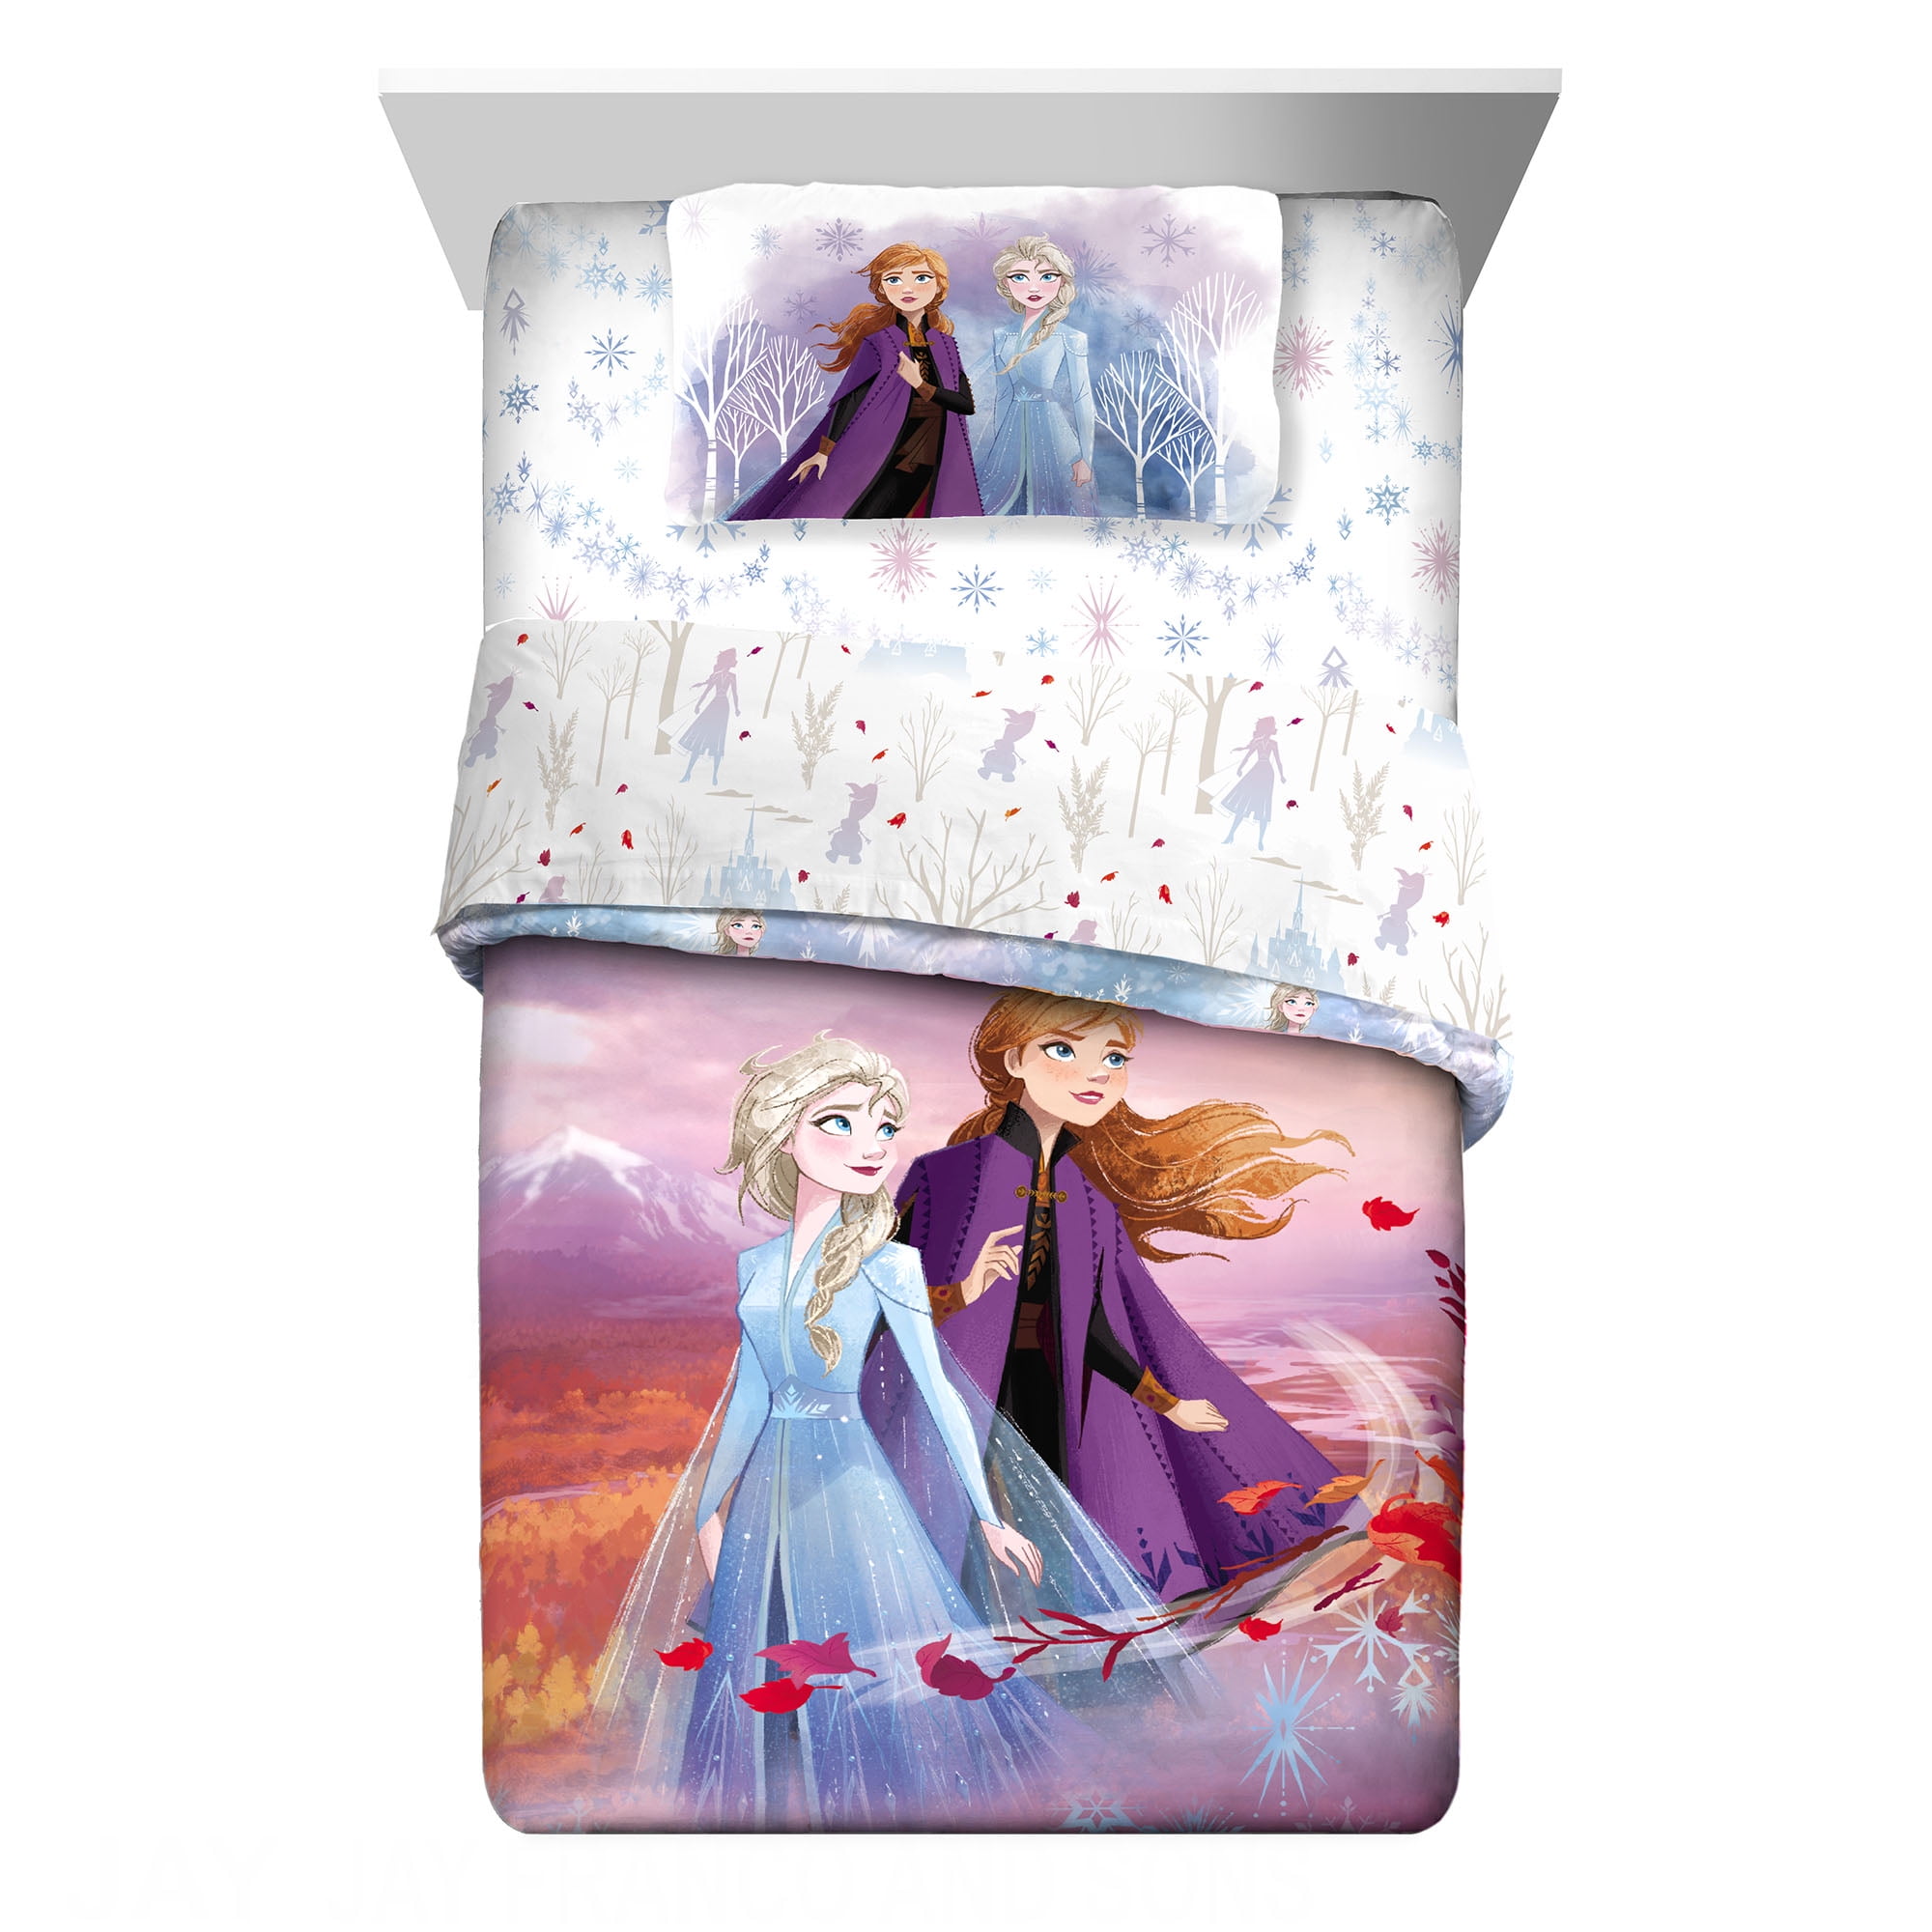 DISNEY FAVORITES BED IN A BAG COMFORTER BED SET WITH FITTED SHEET KIDS TEENS 